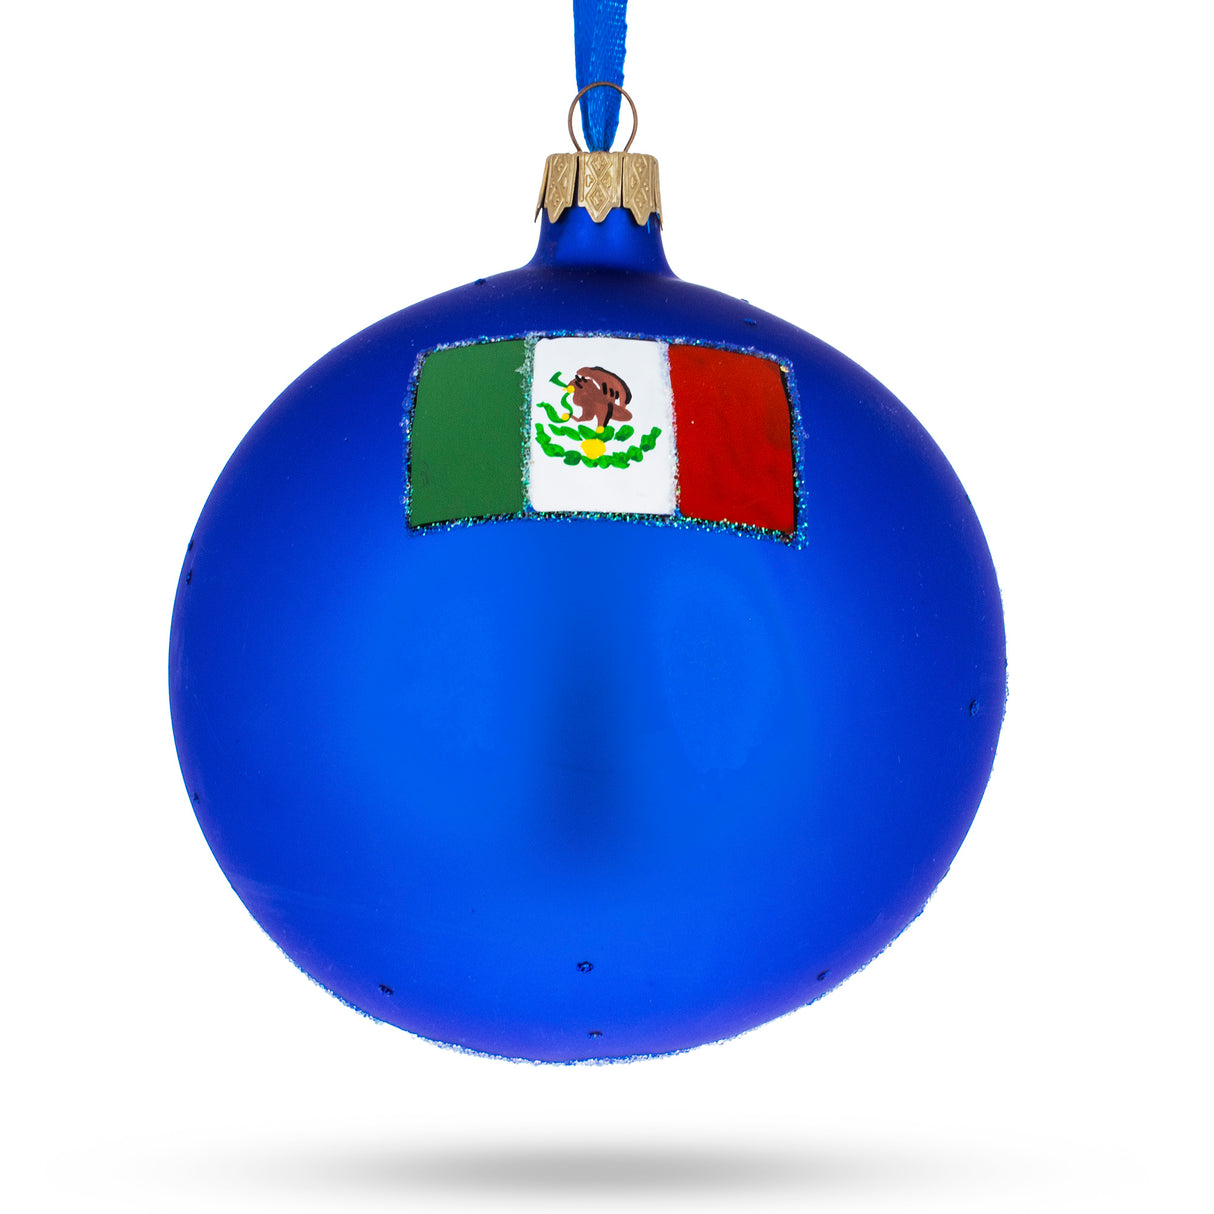 Buy Christmas Ornaments > Travel > North America > Mexico by BestPysanky Online Gift Ship